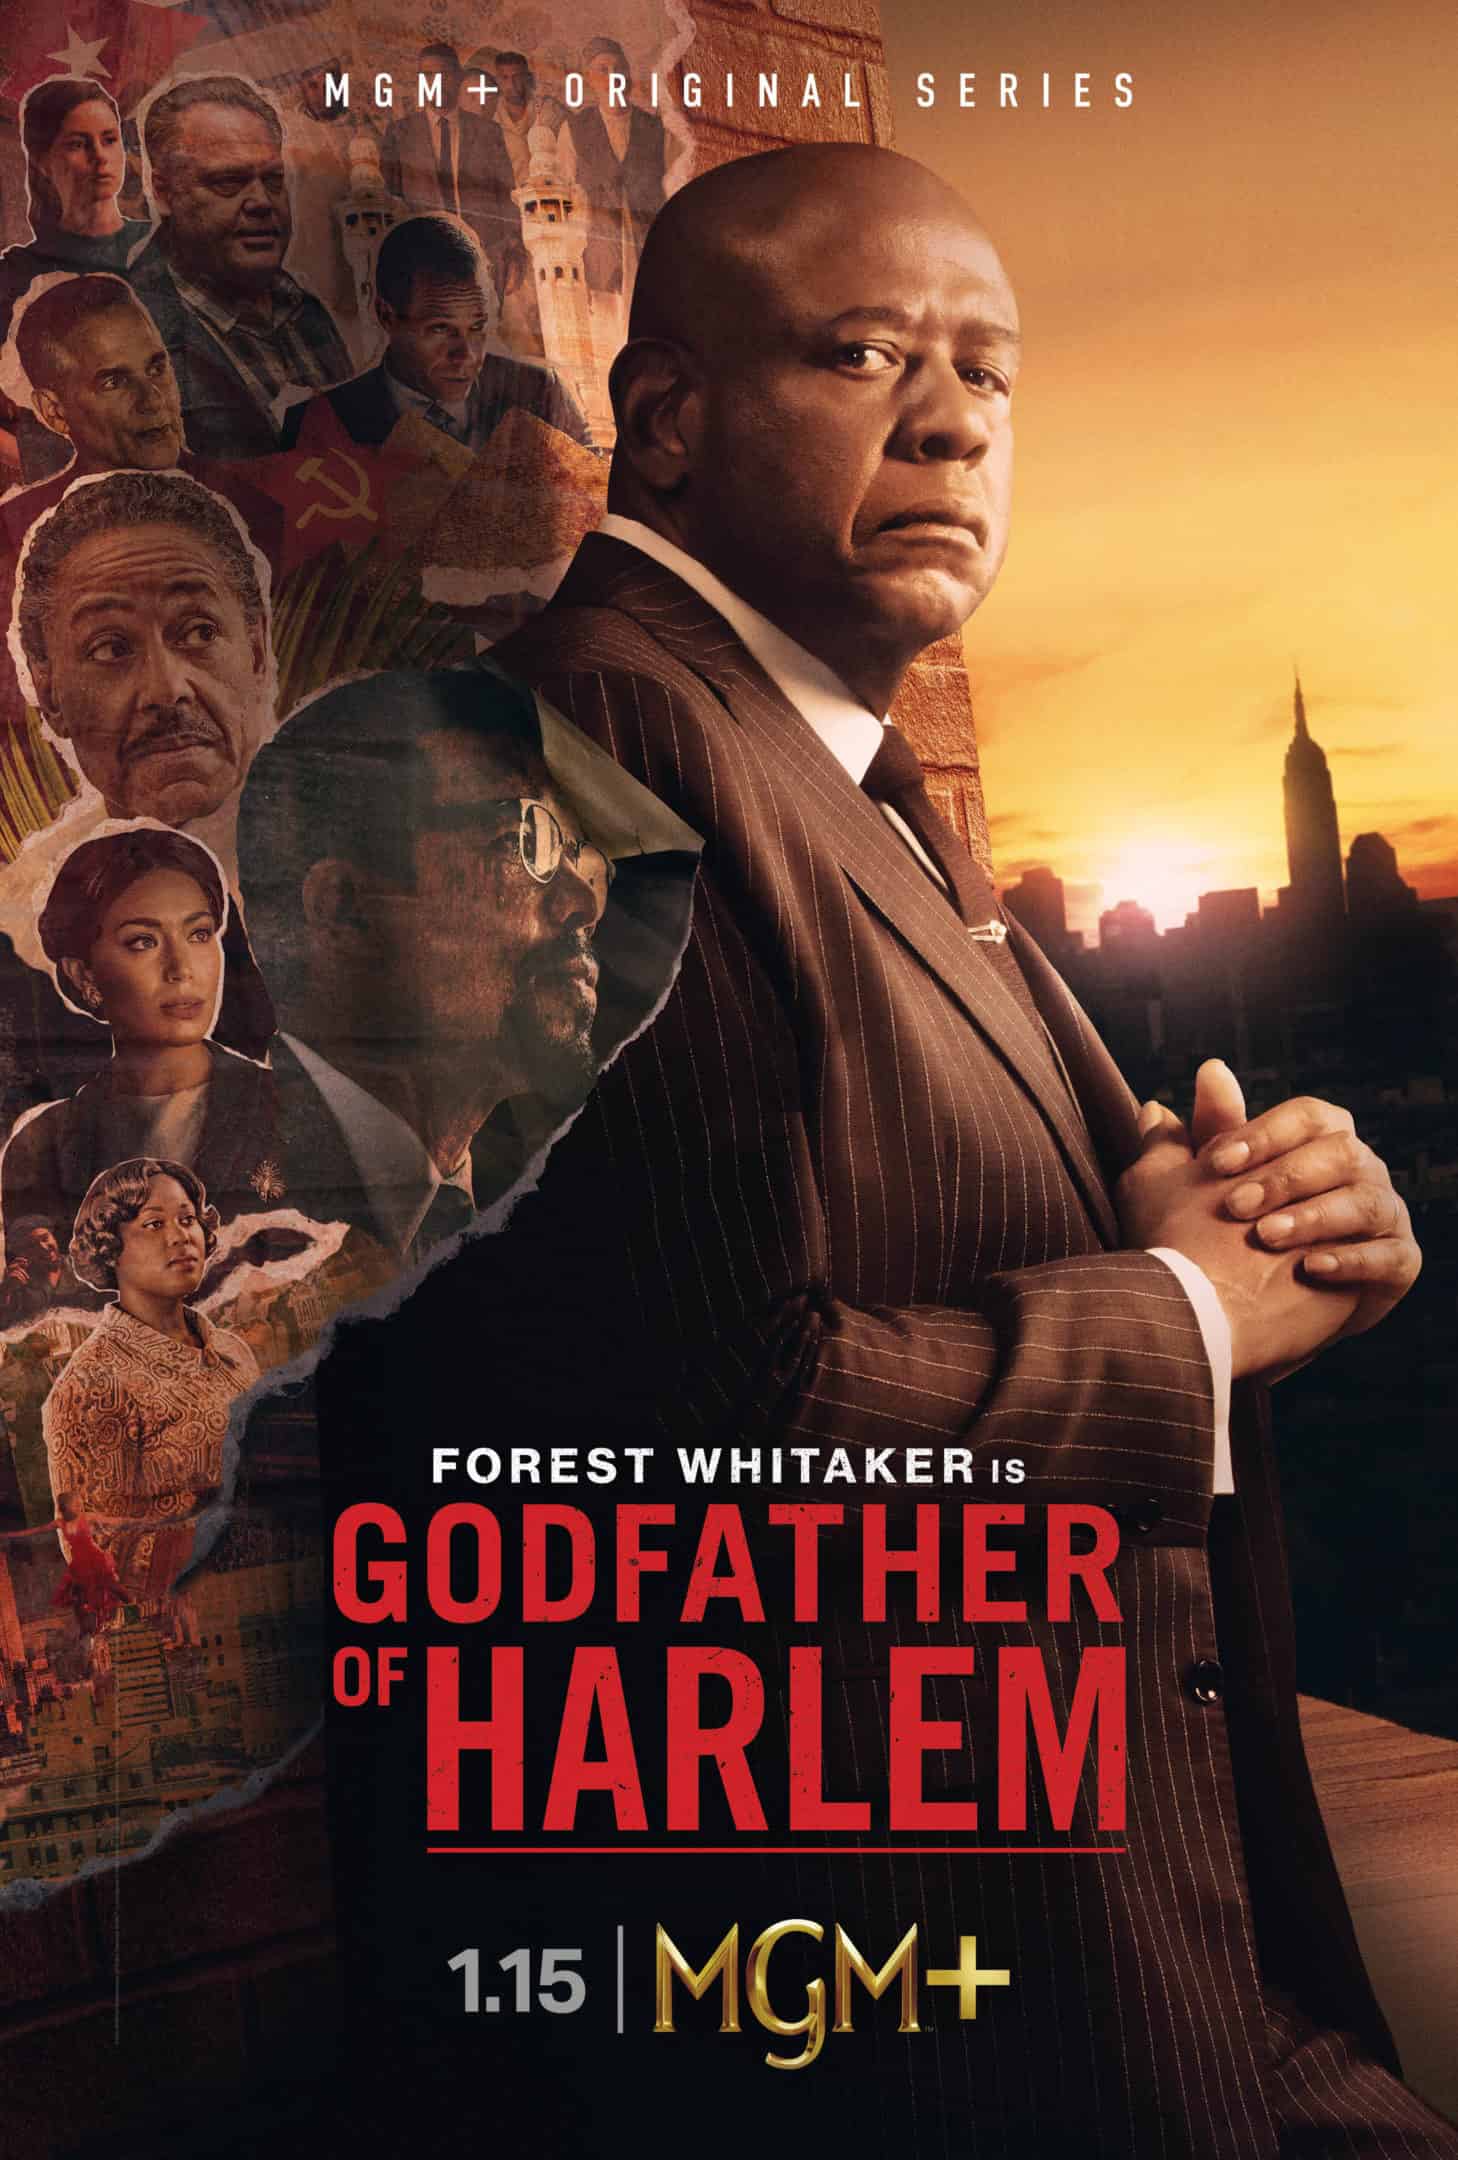 MGM+ debuts the trailer for Godfather of Harlem: Season 3 1